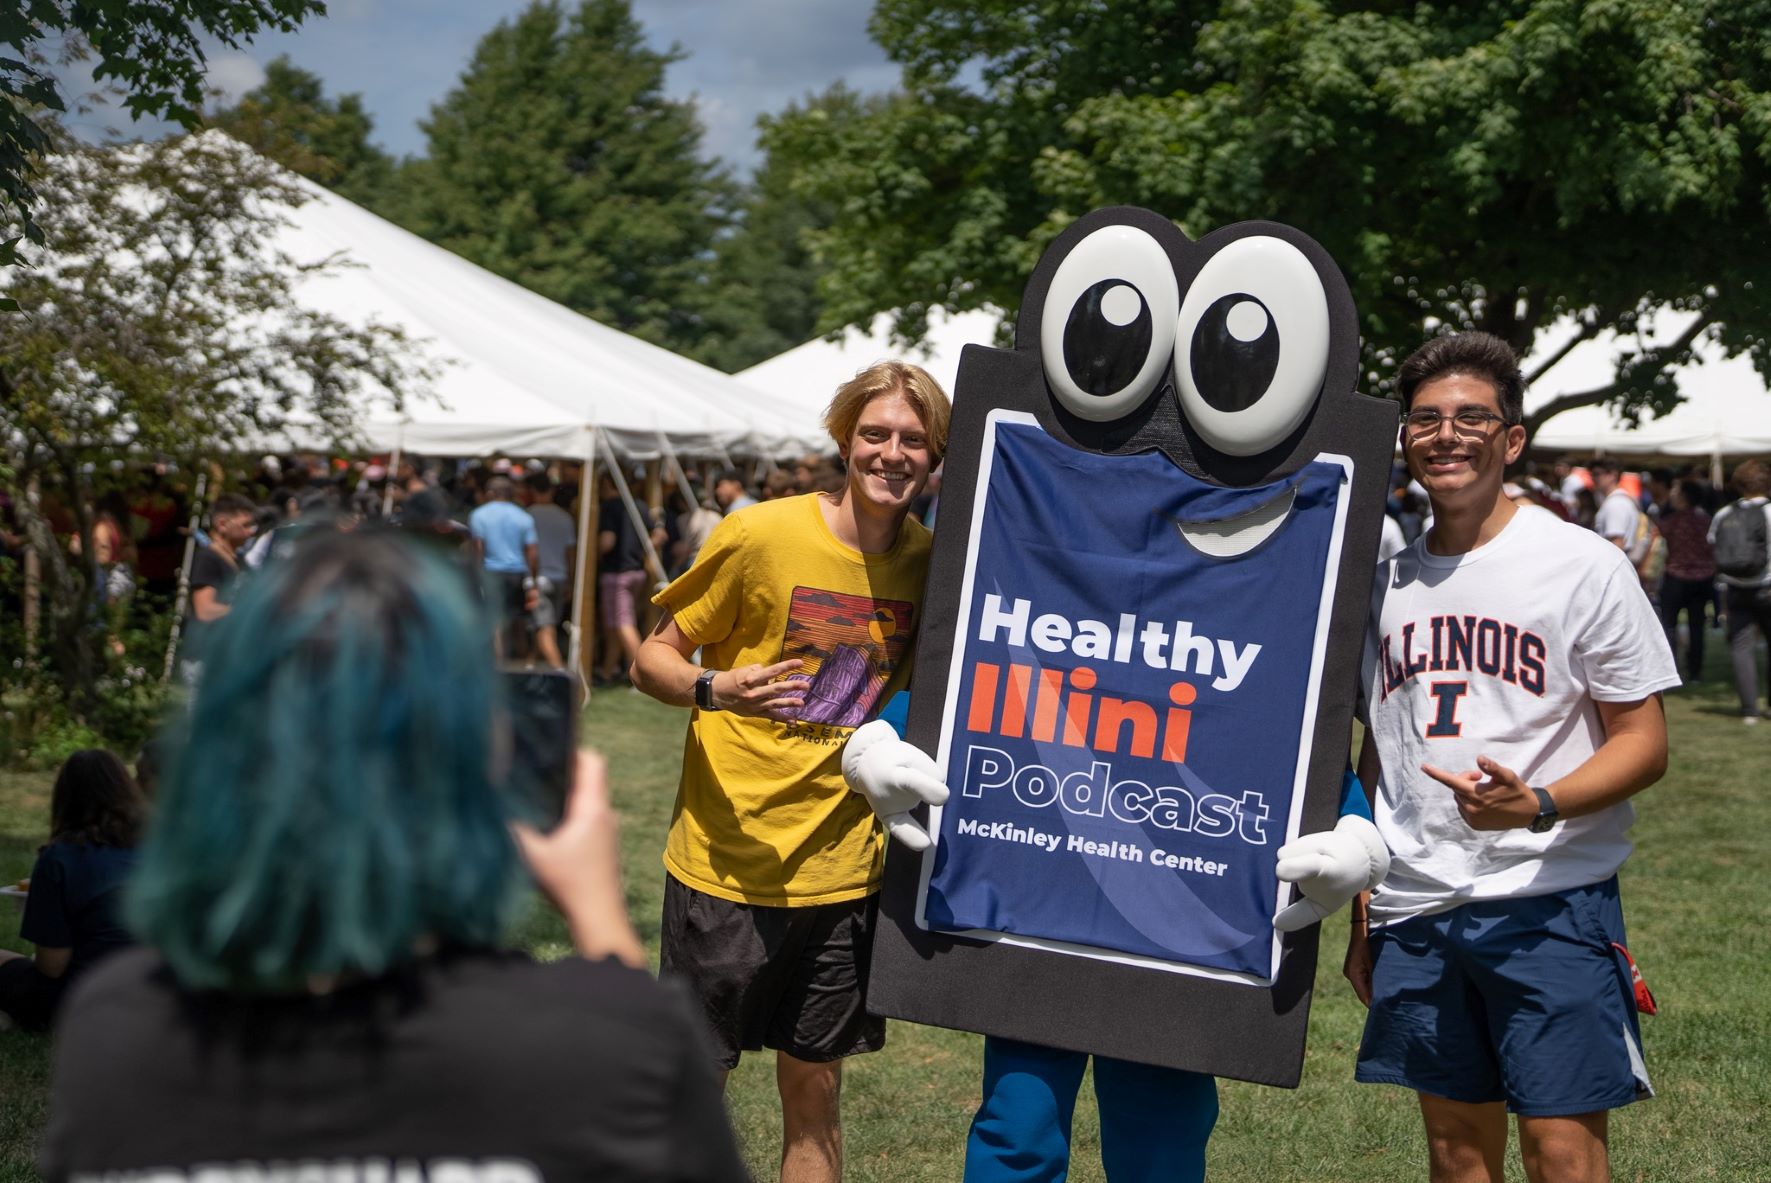 Image shows two smiling students posing with a cell phone character. Cell phone screen reads "Healthy Illini" in blue, orange, and white. A third student is in the foreground taking a picture.